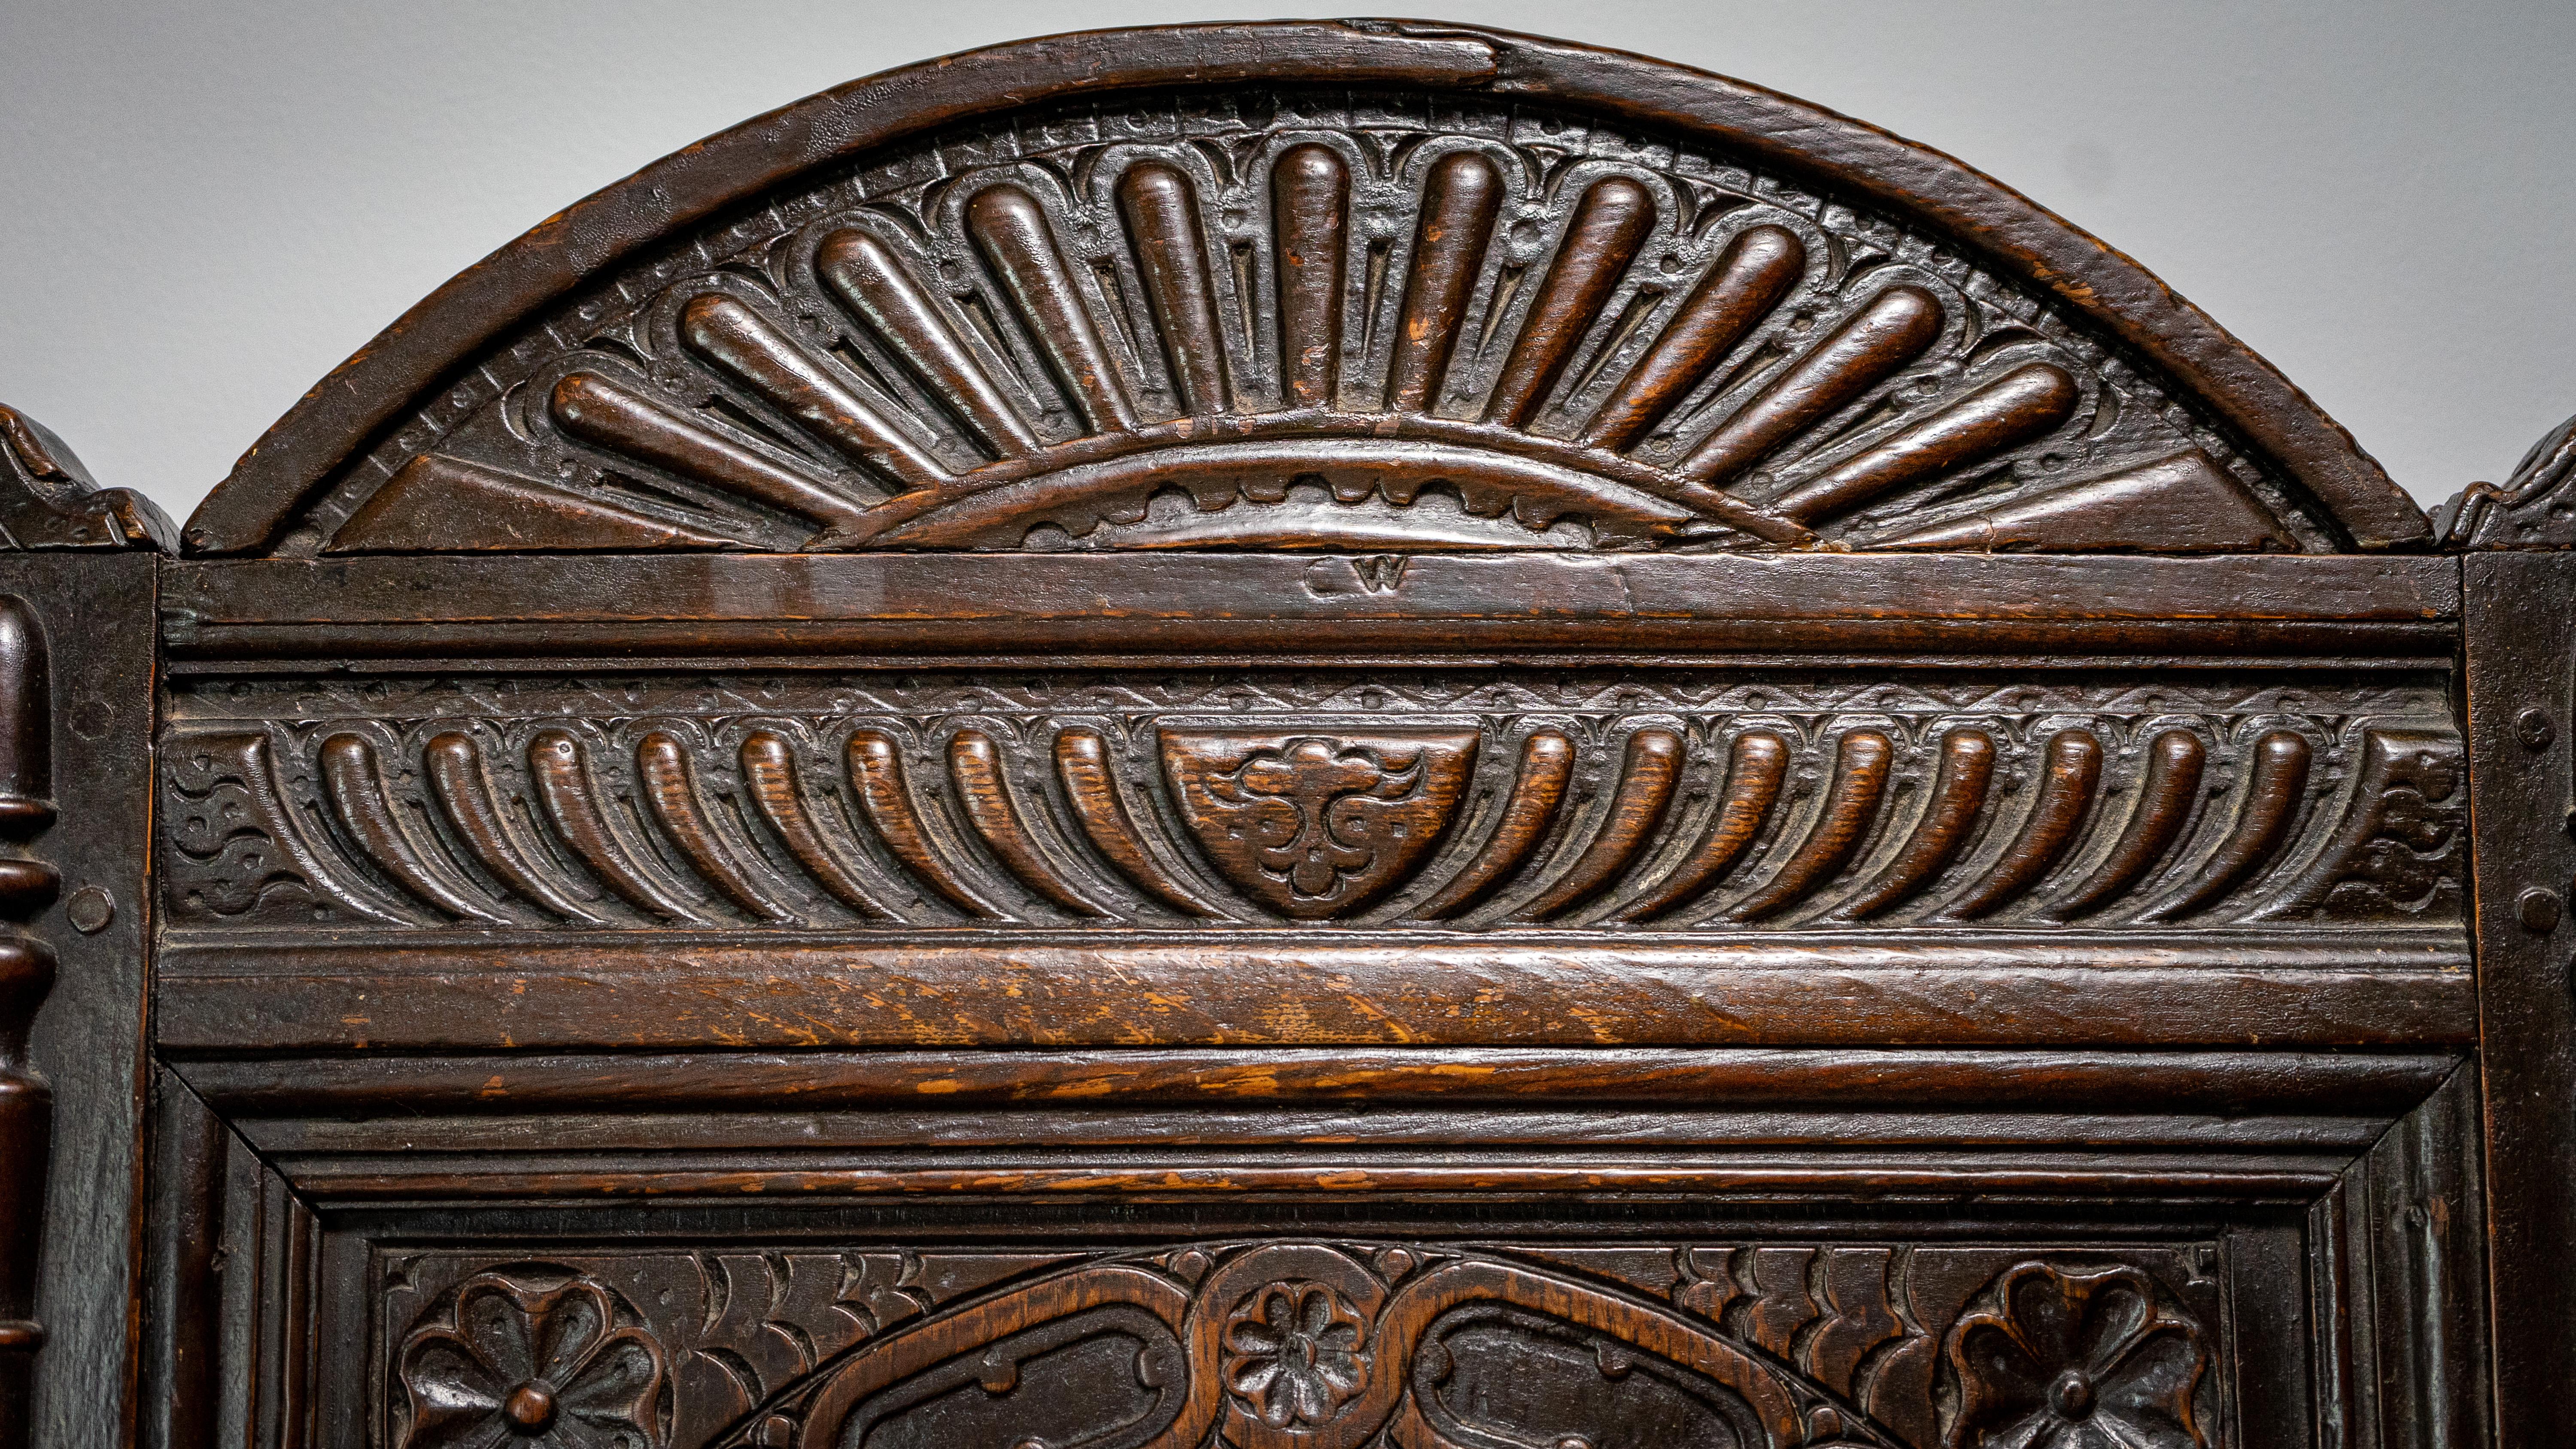 17th Century, James I, Joined Oak Wainscot, England, Circa 1603 - 1625 In Good Condition For Sale In Leominster, GB